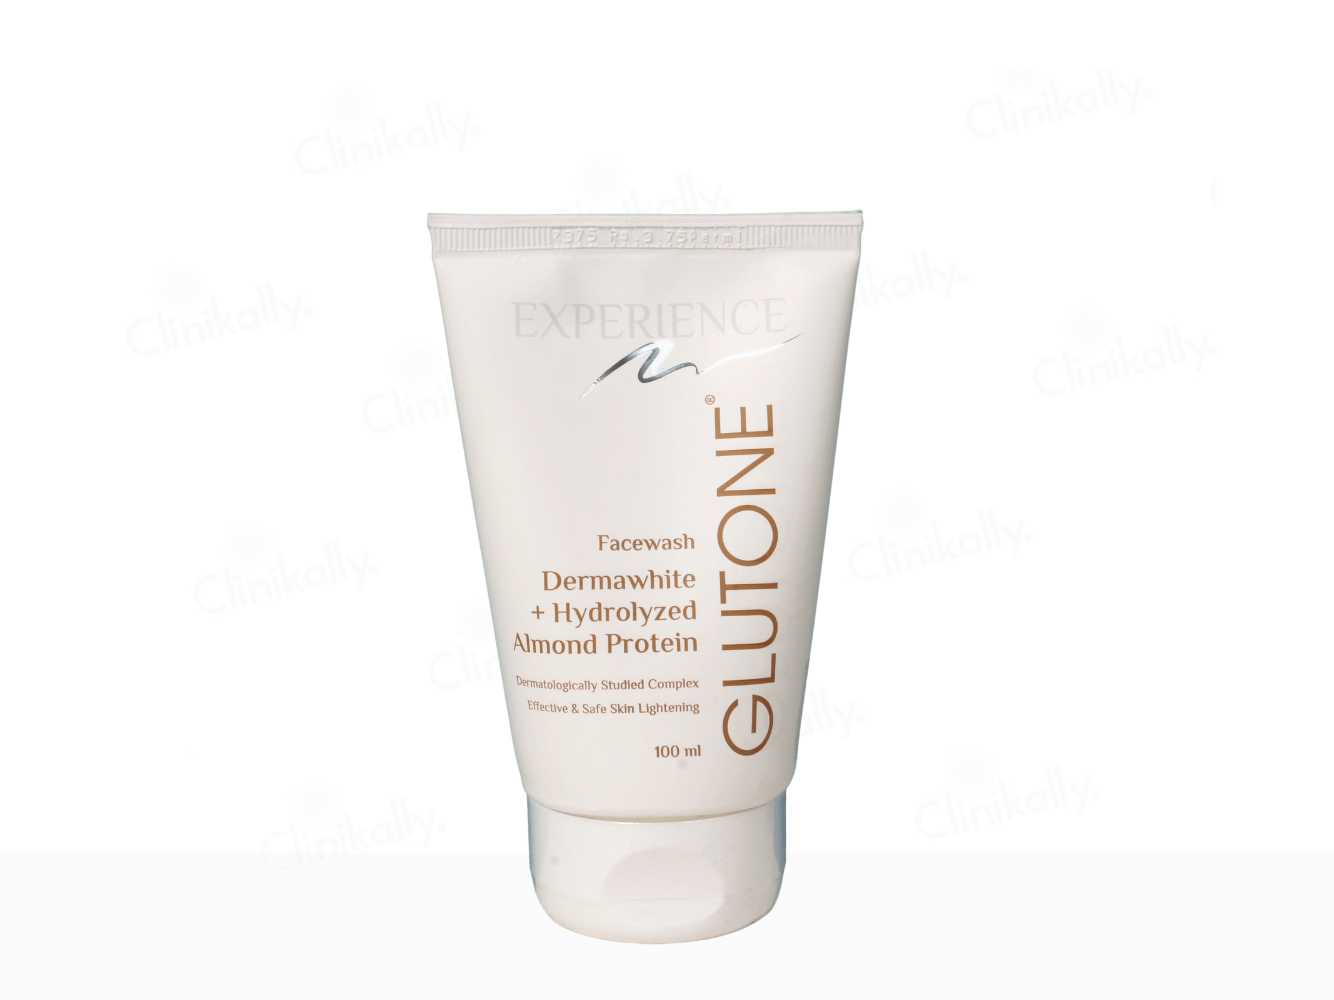 Glutone Face Wash With Dermawhite And Hydrolyzed Almonds For Brighter & Radiant Skin - Clinikally